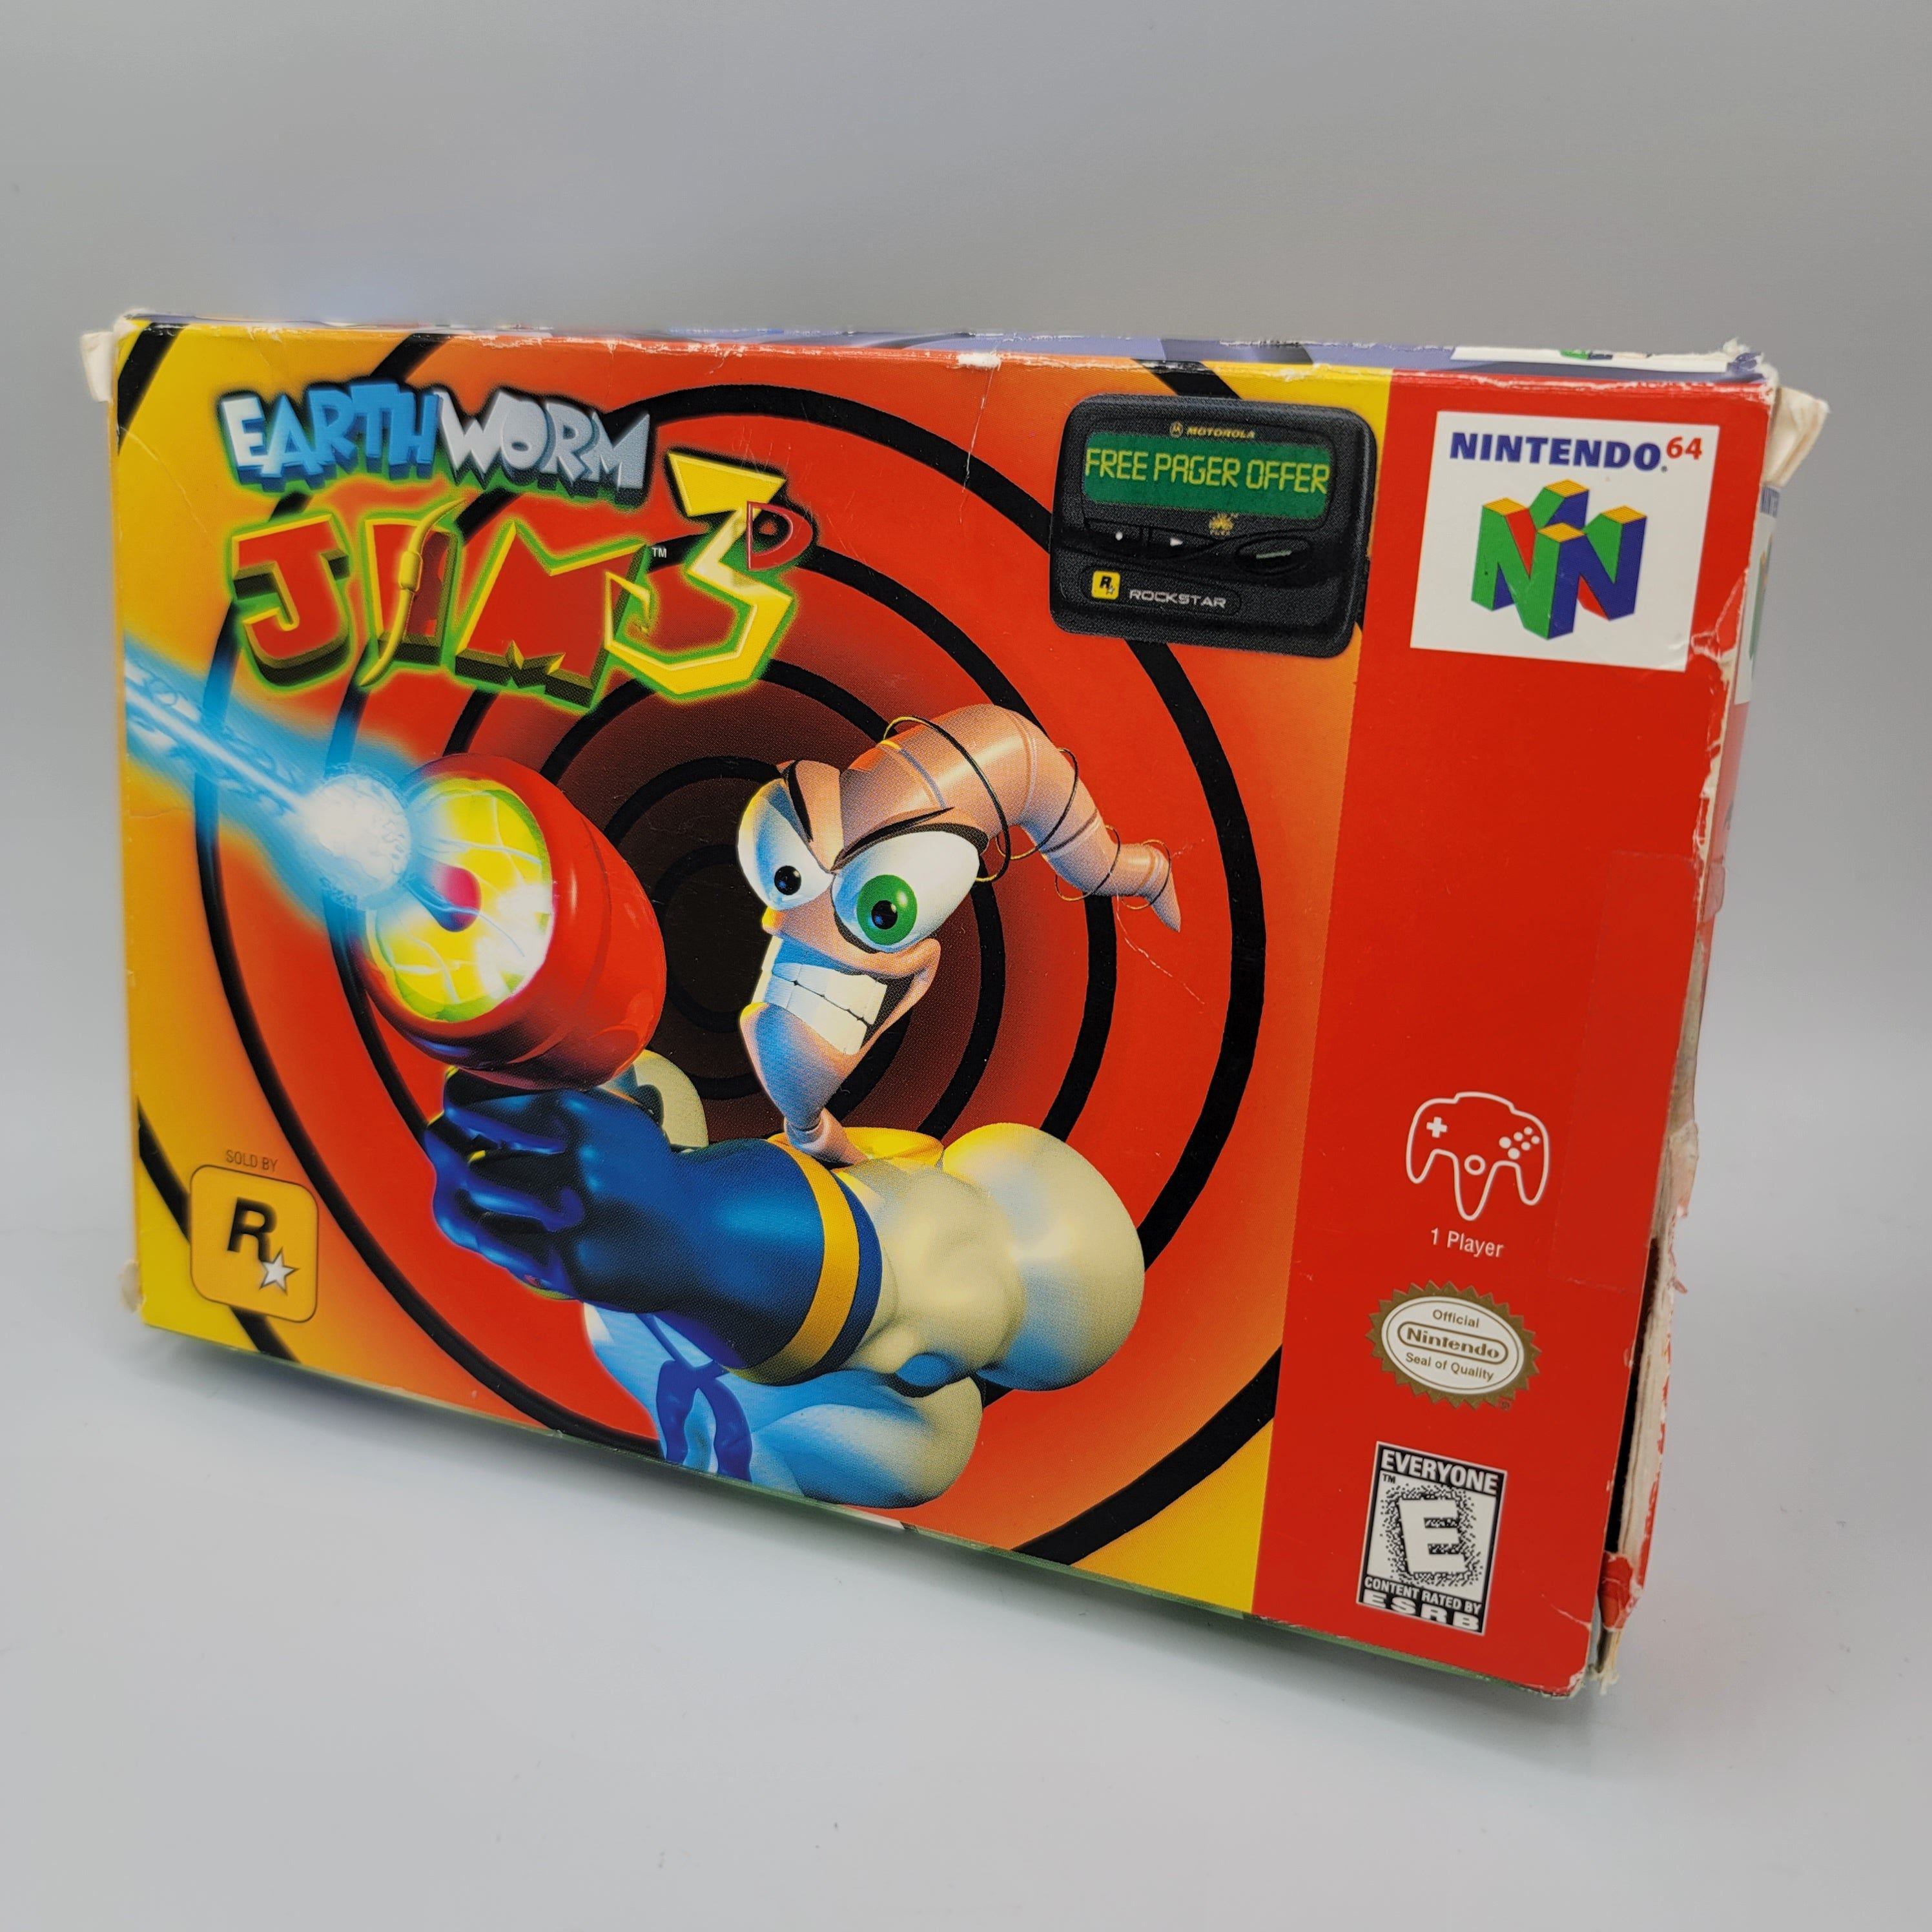 N64 - Earthworm Jim 3D (Complete in Box / C / No Manual)